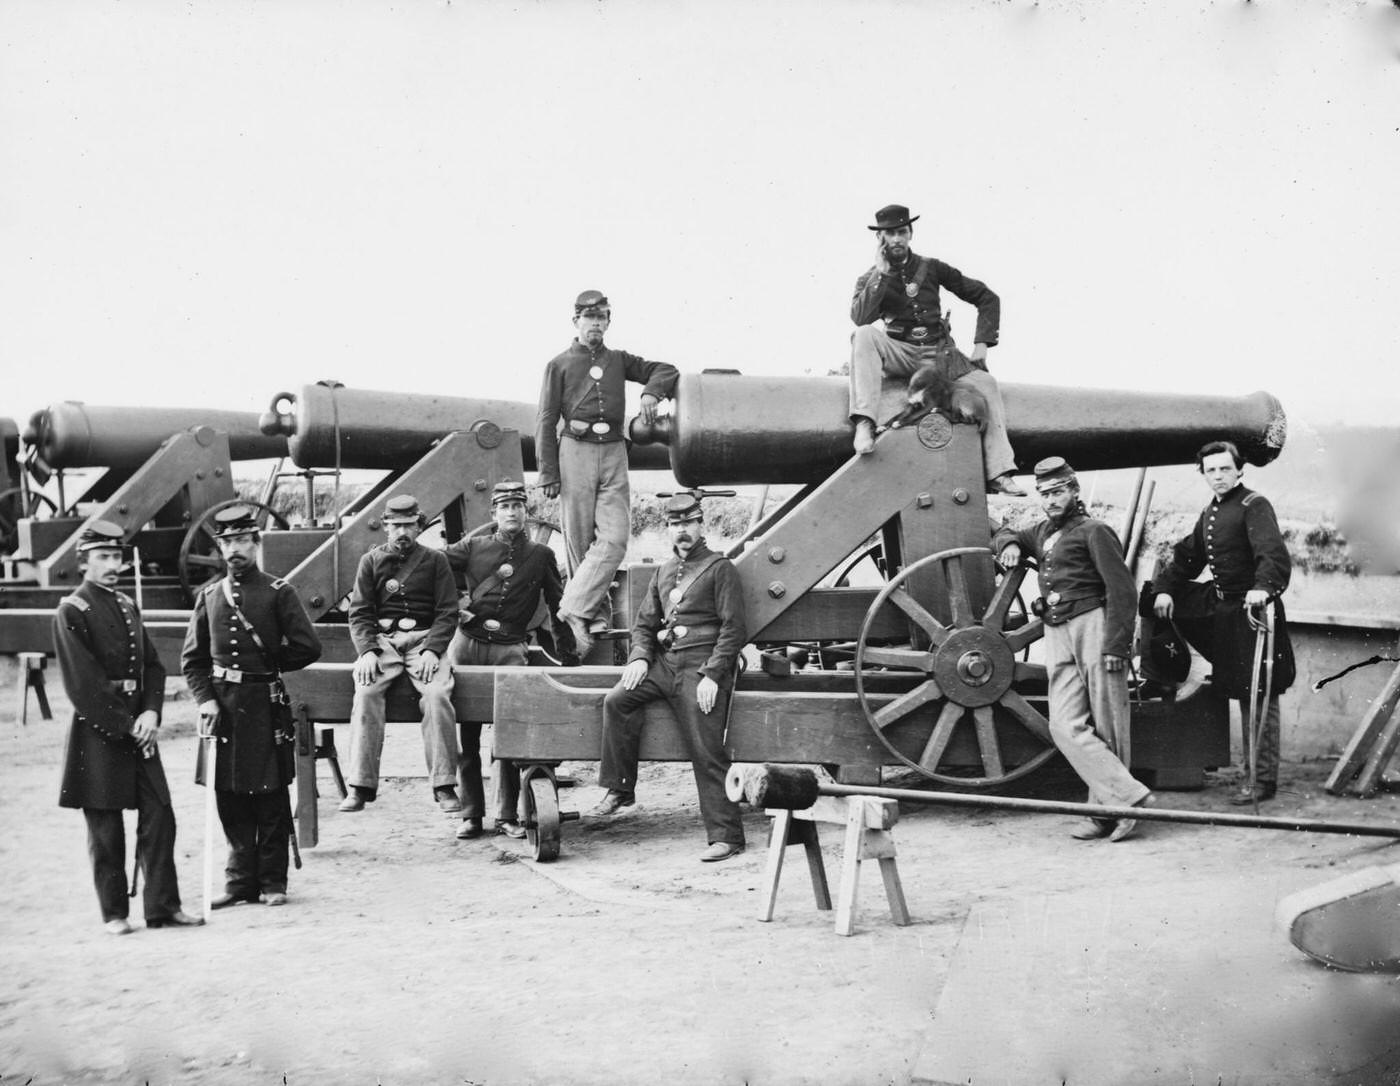 Officers and men of the 3rd Regiment Massachusetts Heavy Artillery stand next to their Columbiad guns, Fort Totten, Washington, D.C., 1865